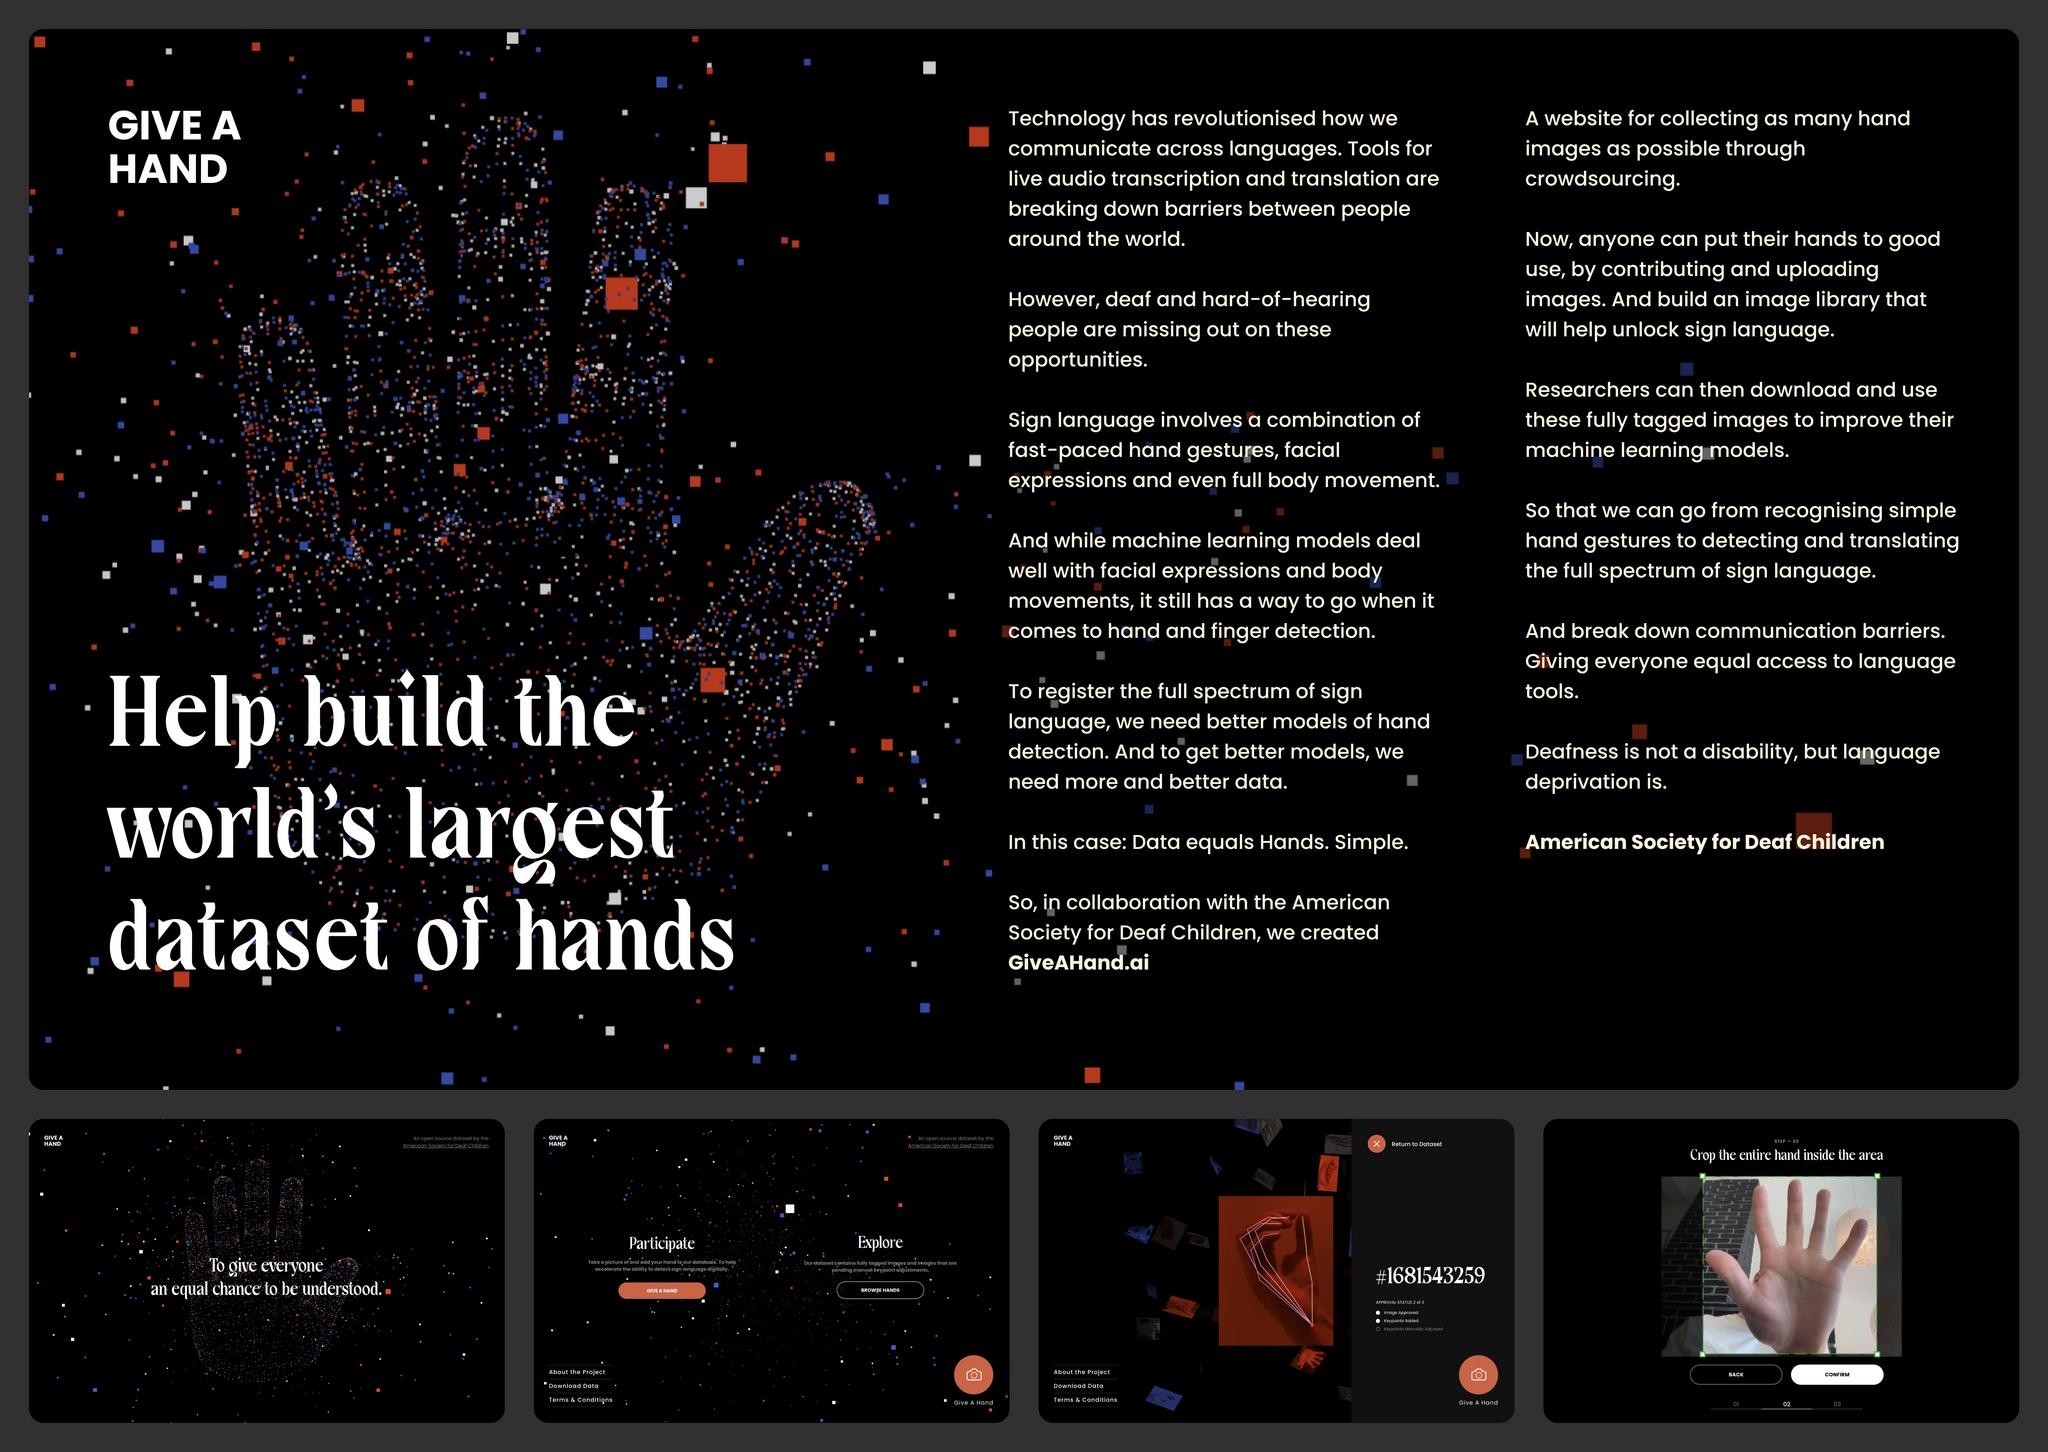 GIVE A HAND - BUILDING THE WORLD’S LARGEST OPEN-SOURCE IMAGE LIBRARY OF HANDS